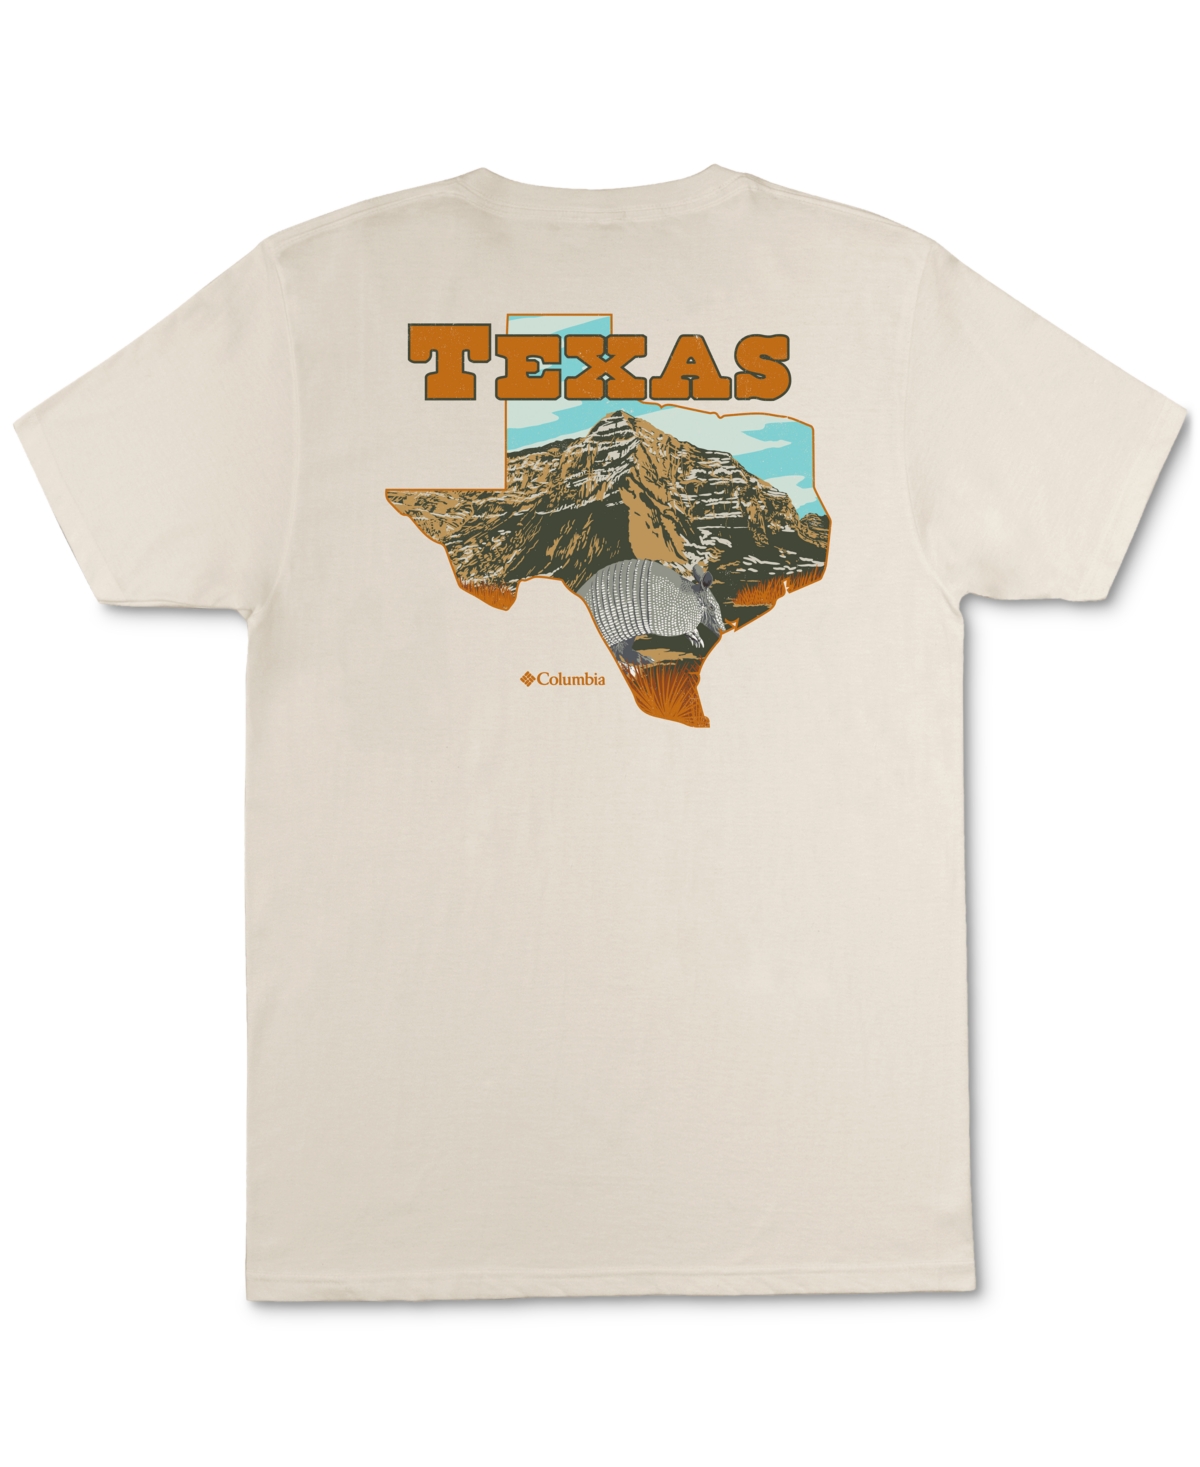 Columbia Men's Allendale Texas State Graphic T-Shirt